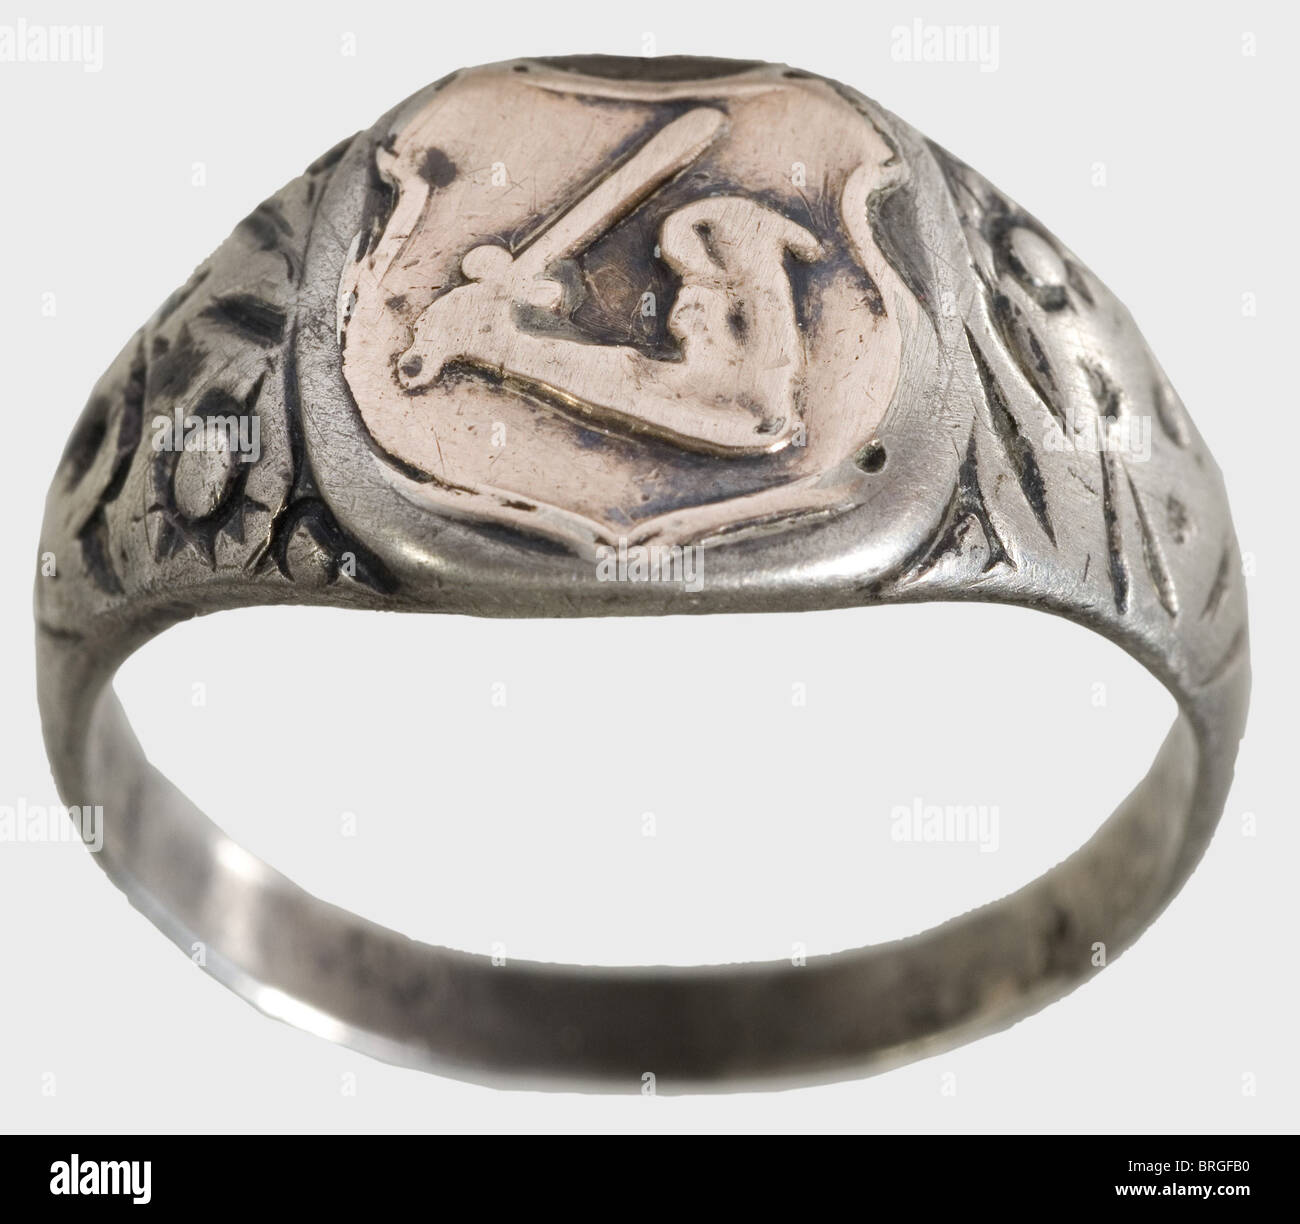 A SS death's-head ring,and a heraldic ring of the Estonian Legion Silver,custom-made issue of the jeweller Gahr in Munich with separately soldered-on death's head. On the inside surface the engraved dedication: 'S.lb. Wonerat 21.6.42. H. Himmler'. Included is a silver ring with a superimposed golden coat of arms of the Estonian Legion. Marks of fineness. Both rings with signs of wear and traces of acid cleaning. Weight 11.5 and 6.5 g respectively.,historic,historical,1930s,1930s,20th century,Waffen-SS,armed division of the SS,armed service,armed serv,Additional-Rights-Clearences-Not Available Stock Photo